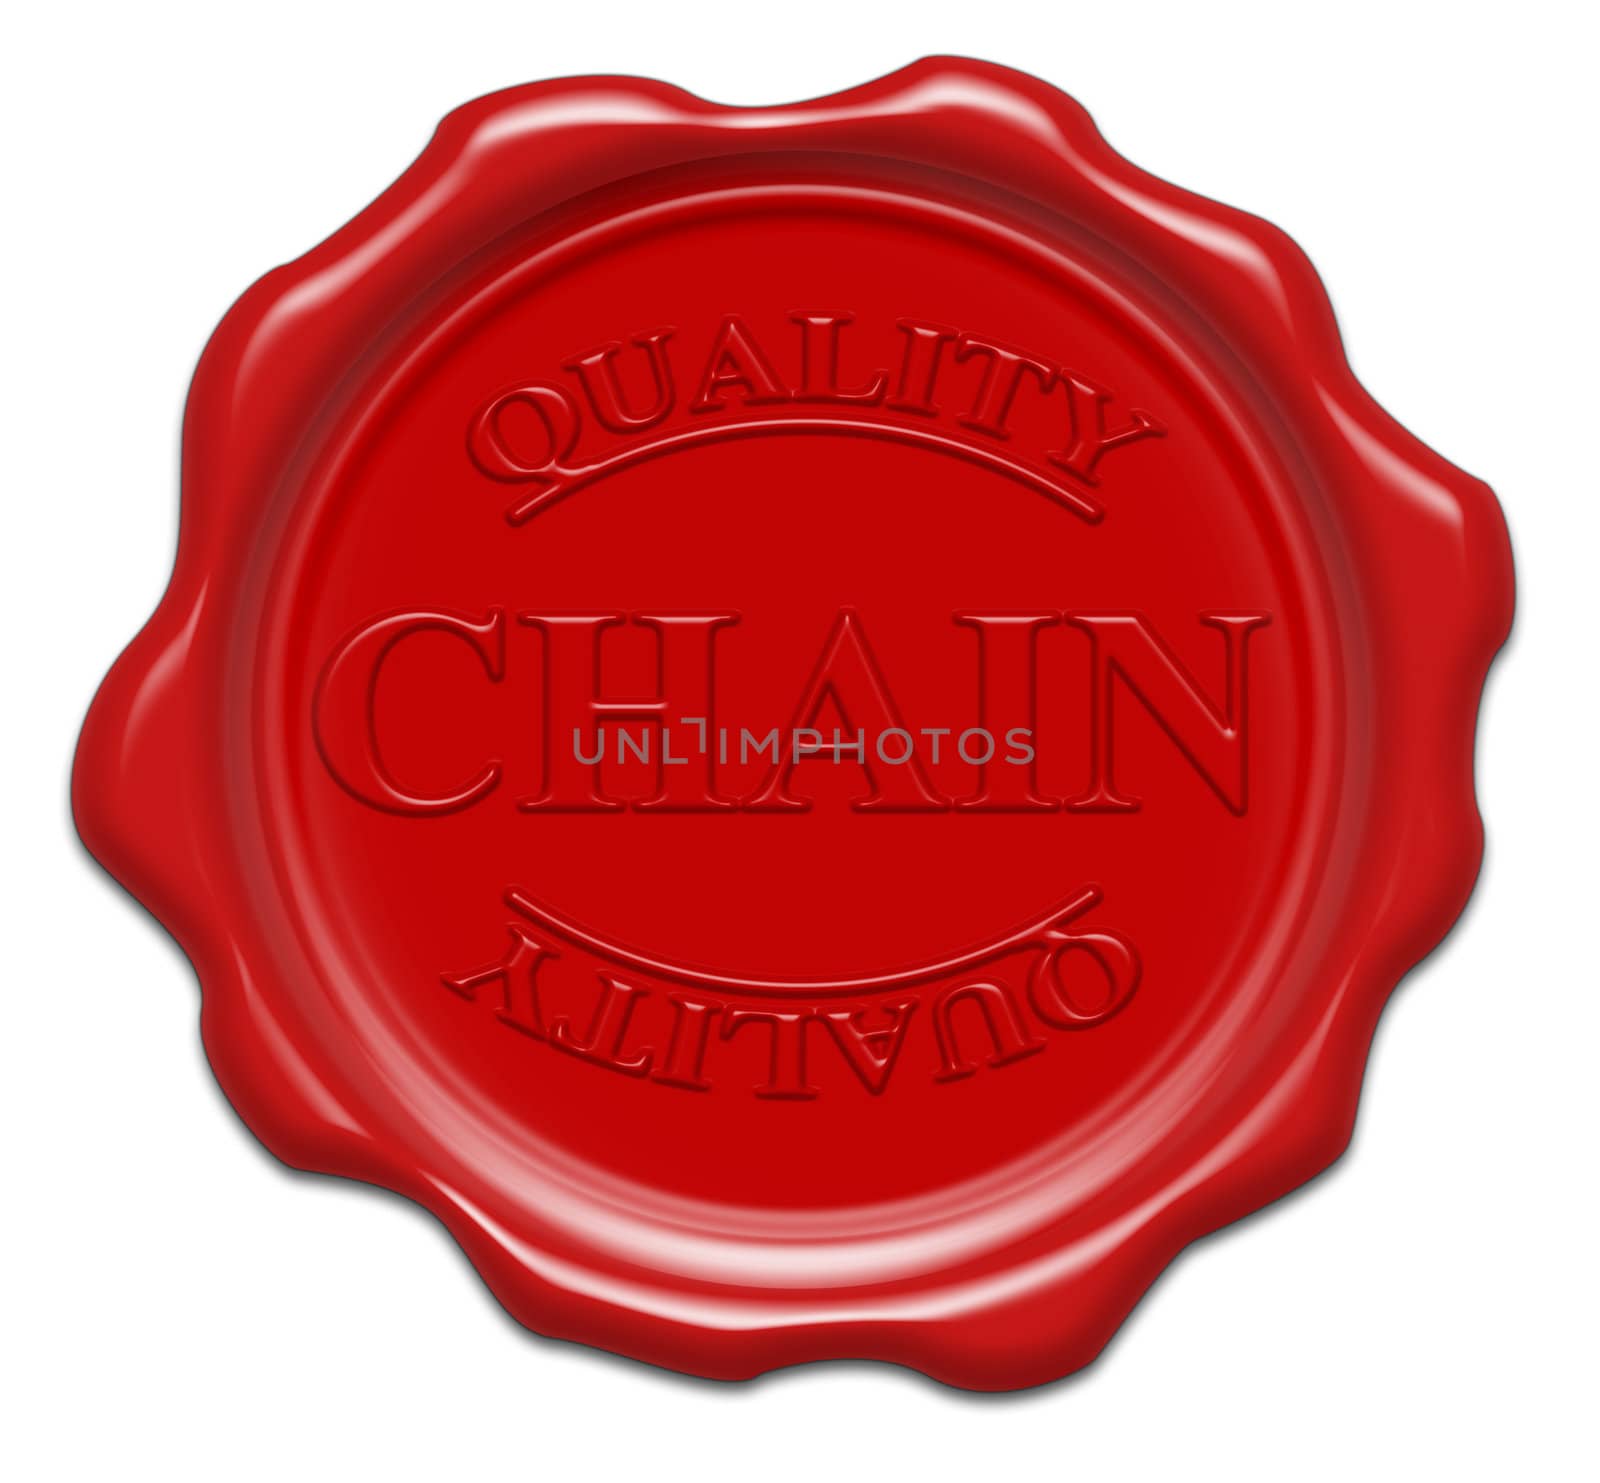 quality chain - illustration red wax seal isolated on white background with word : chain